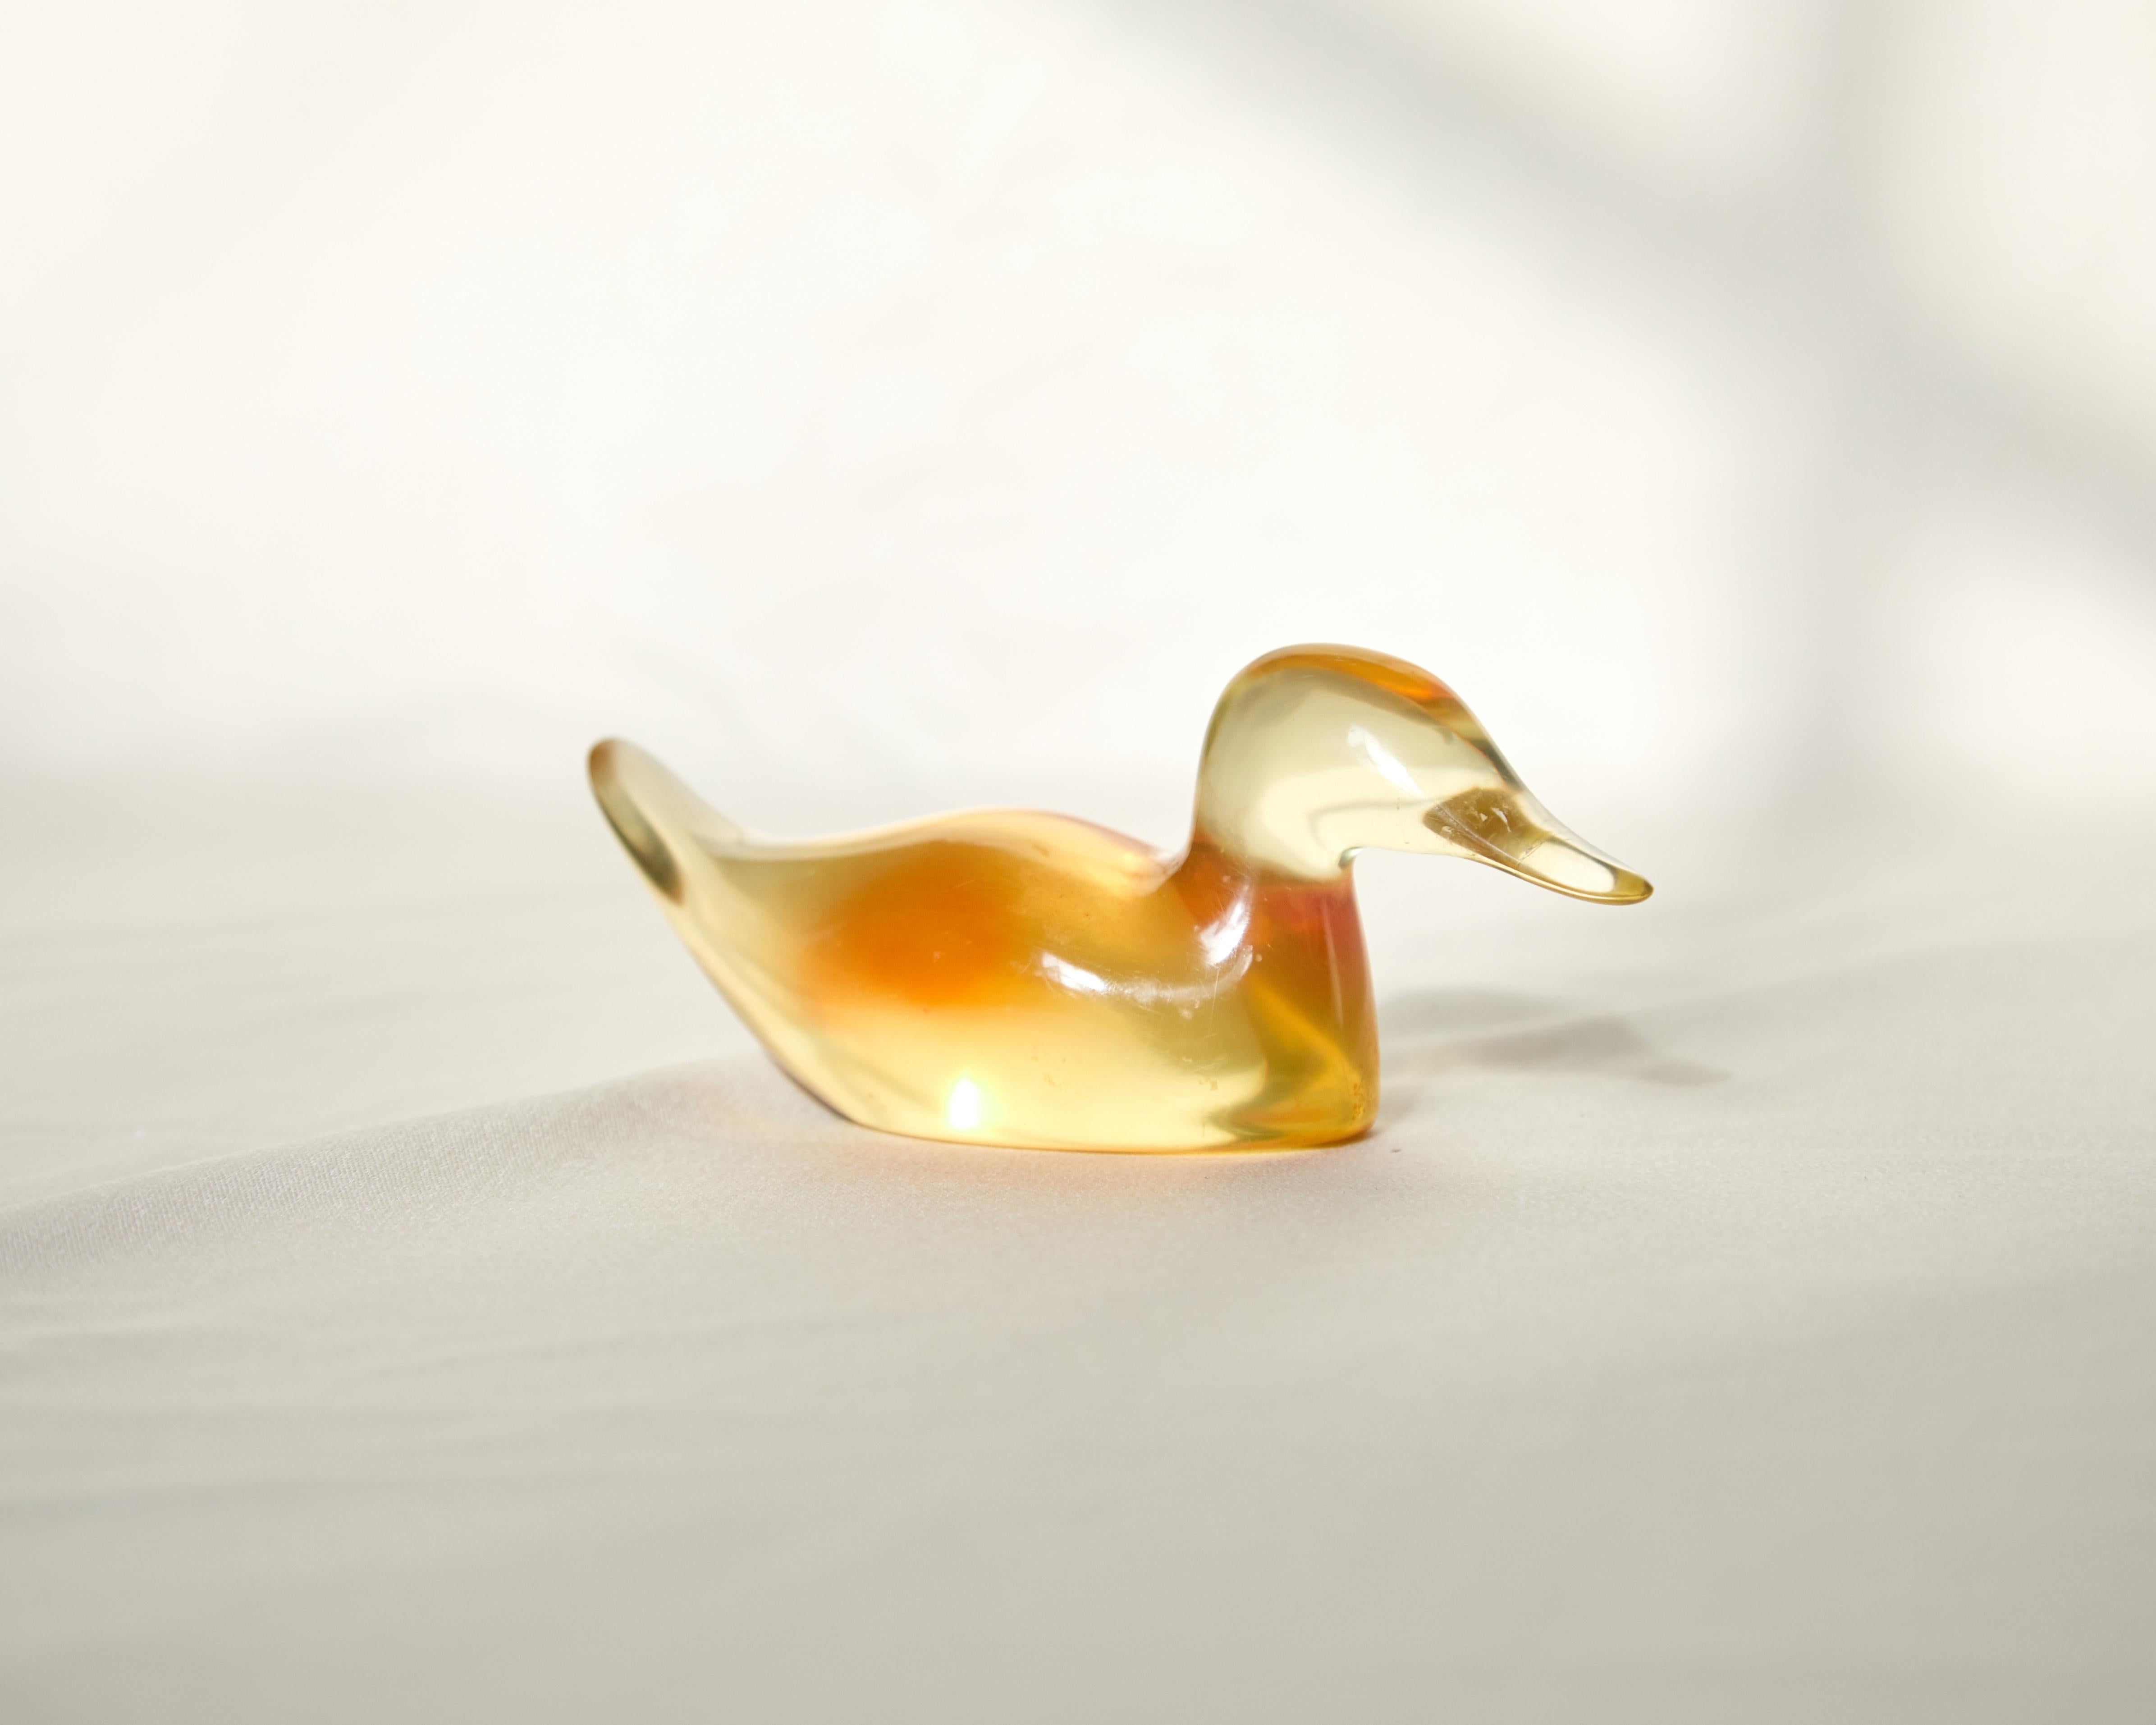 Brazilian midcentury lucite sculpture in the shape of a duck designed by Abraham Palatnik and manufactured by Silon in Rio de Janeiro, that produced large-scale design objects from the 1970s to the 2000s. 

Abraham Palatnik (1928-2020) was a